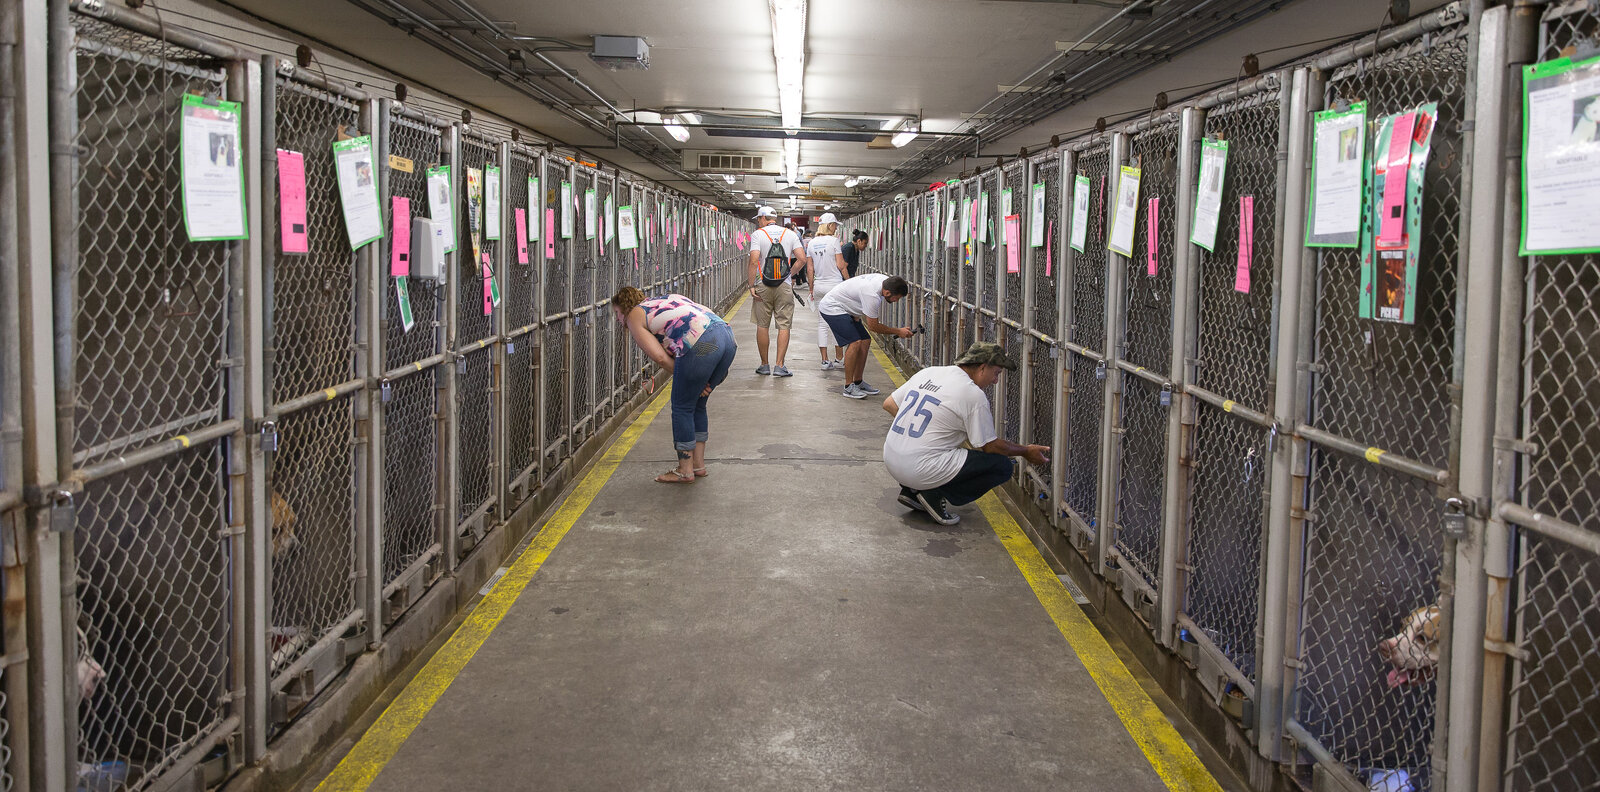 Want to save thousands of homeless pets?